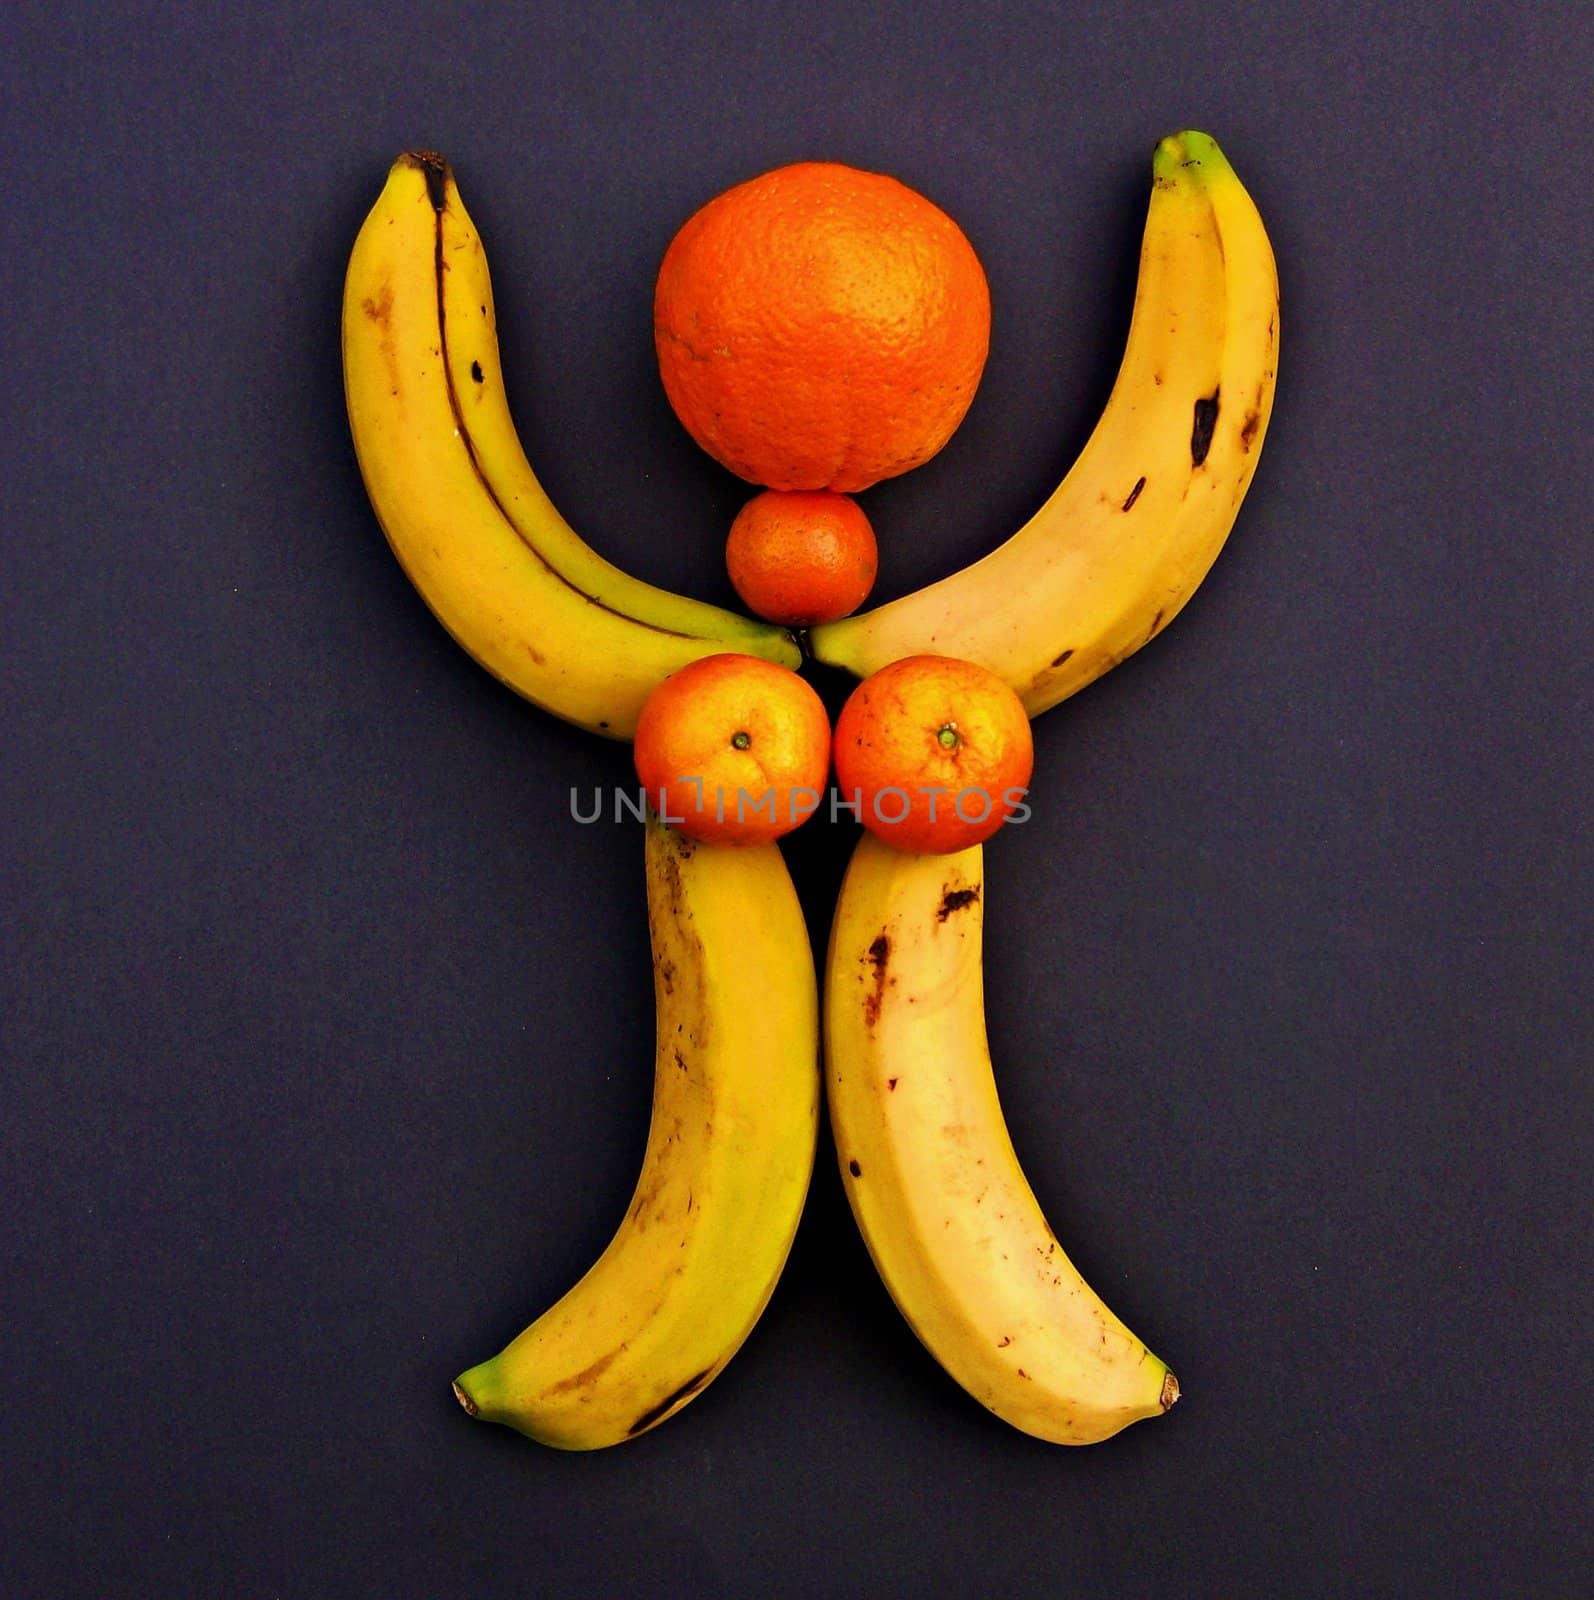 Female shape made with imperfect fruits by BrunoESantos